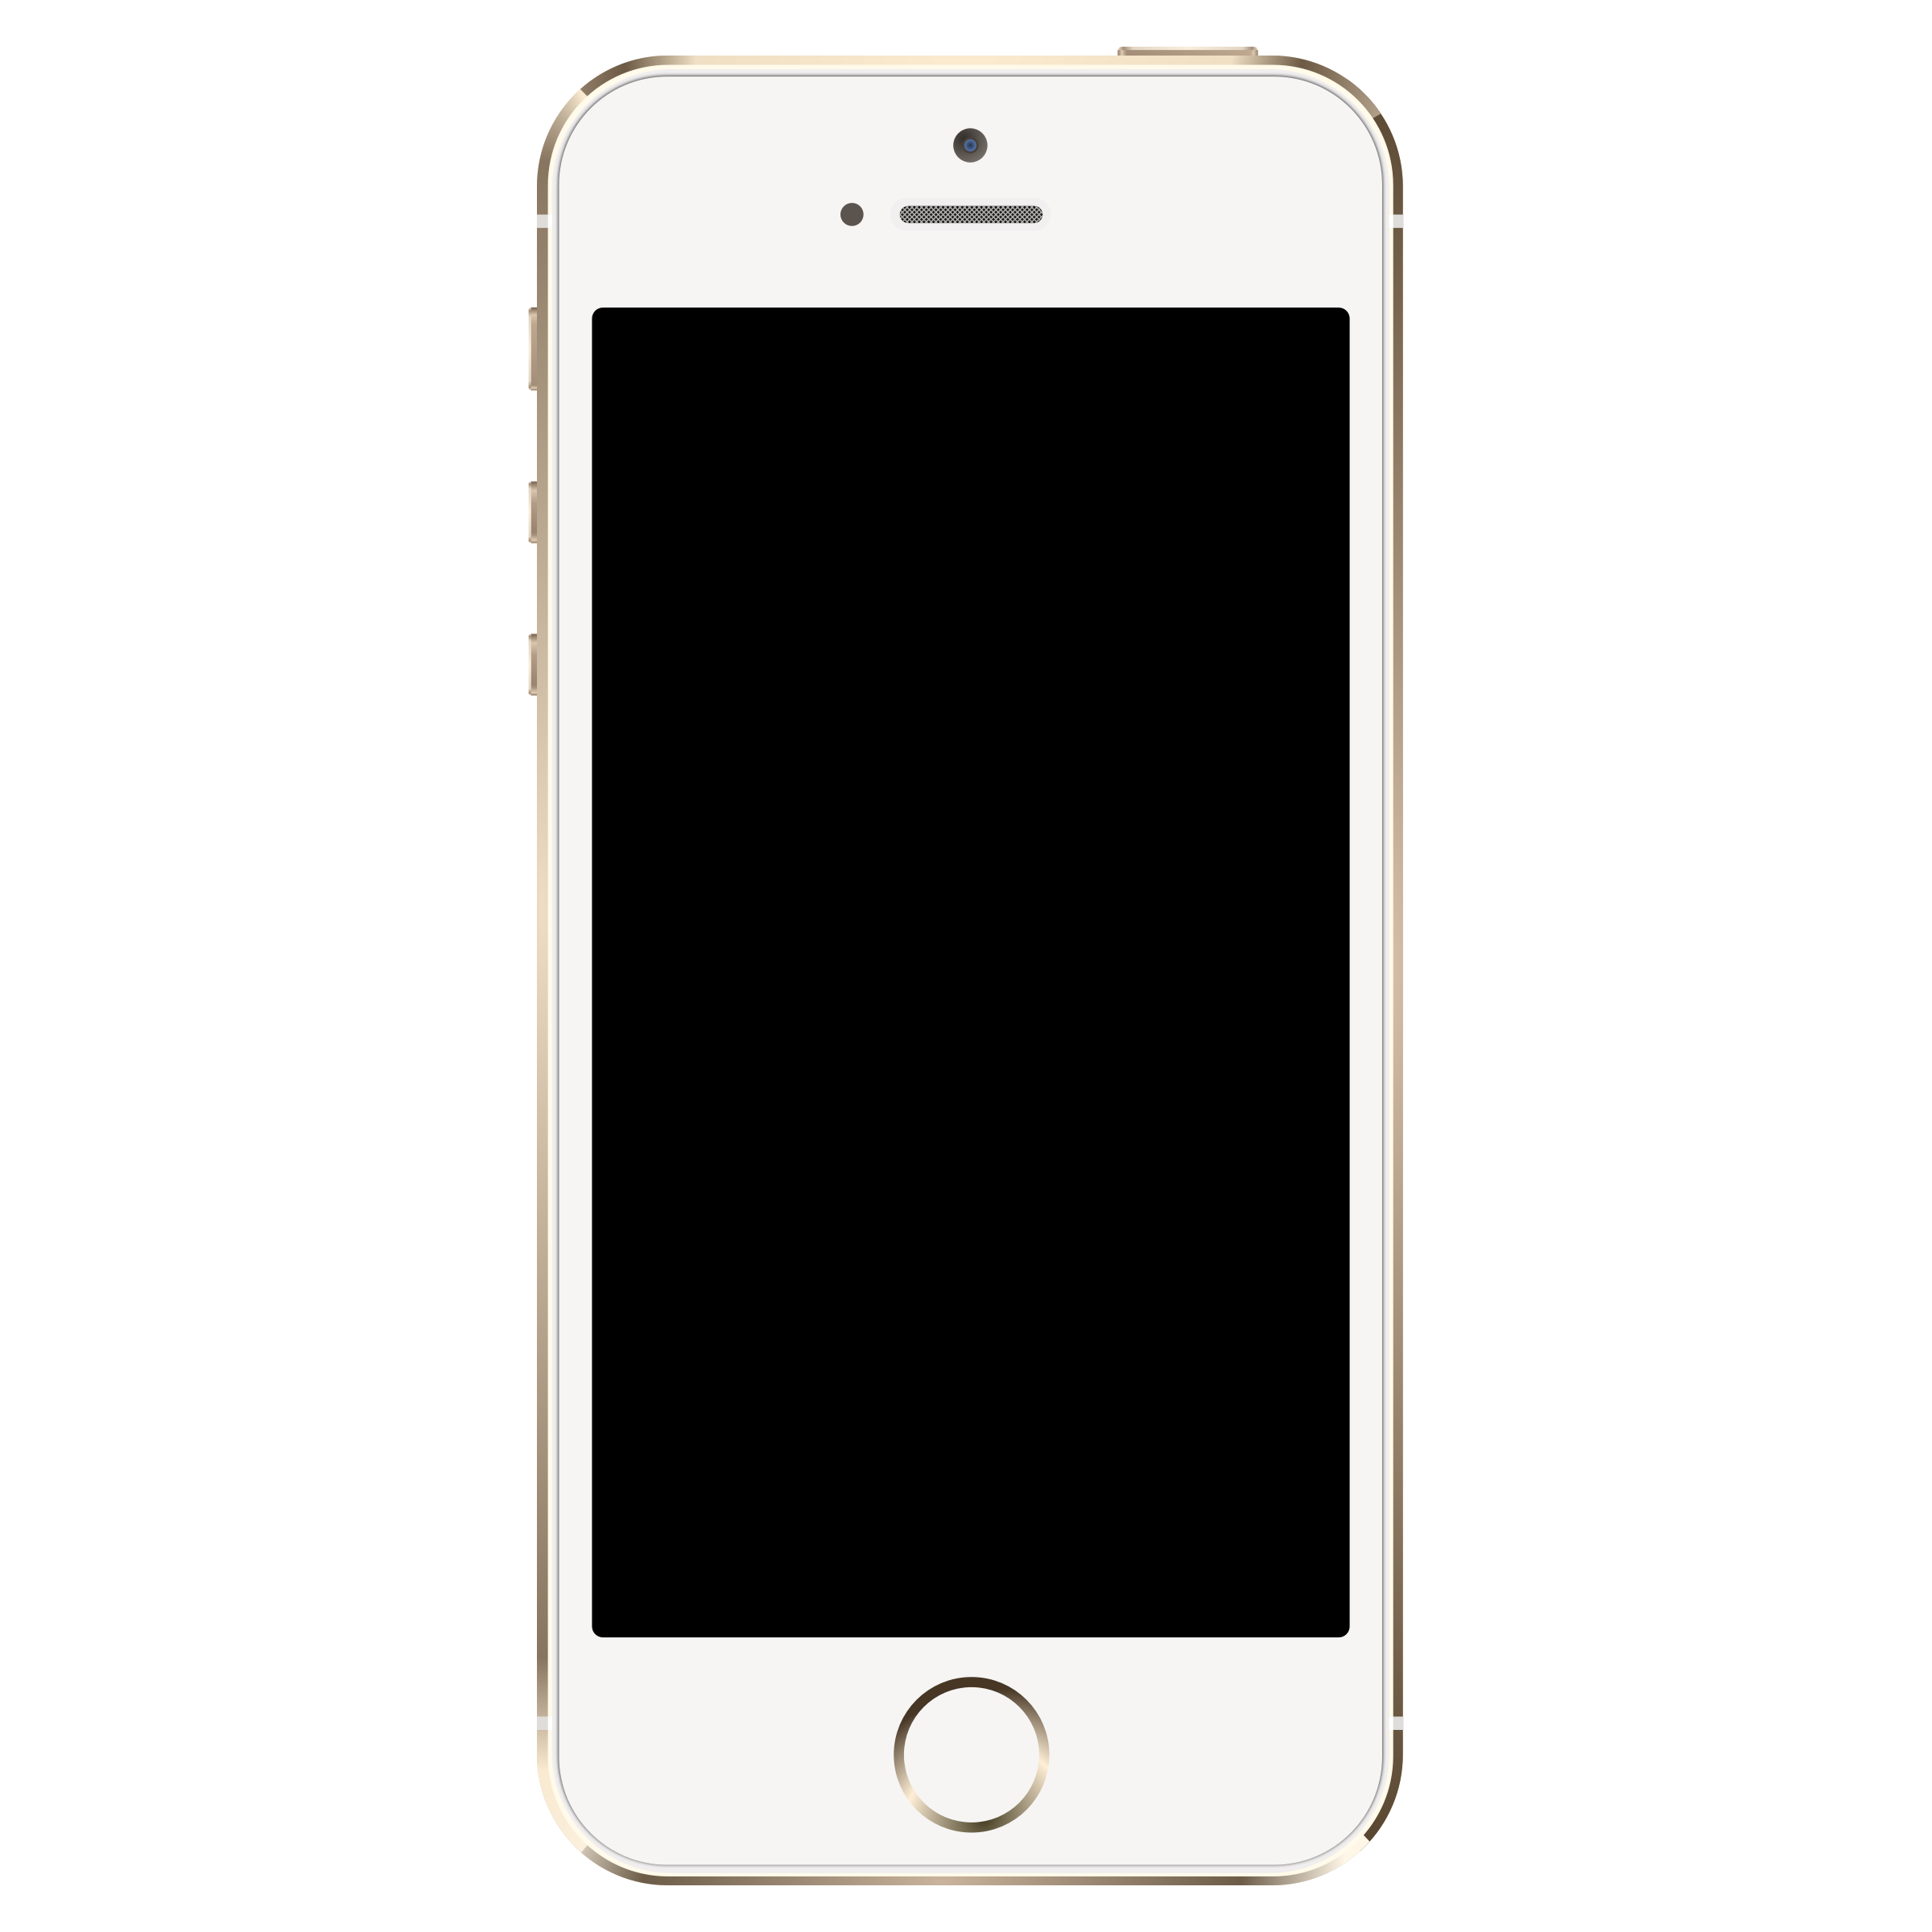 Clipart for iphone 5s - ClipartFox